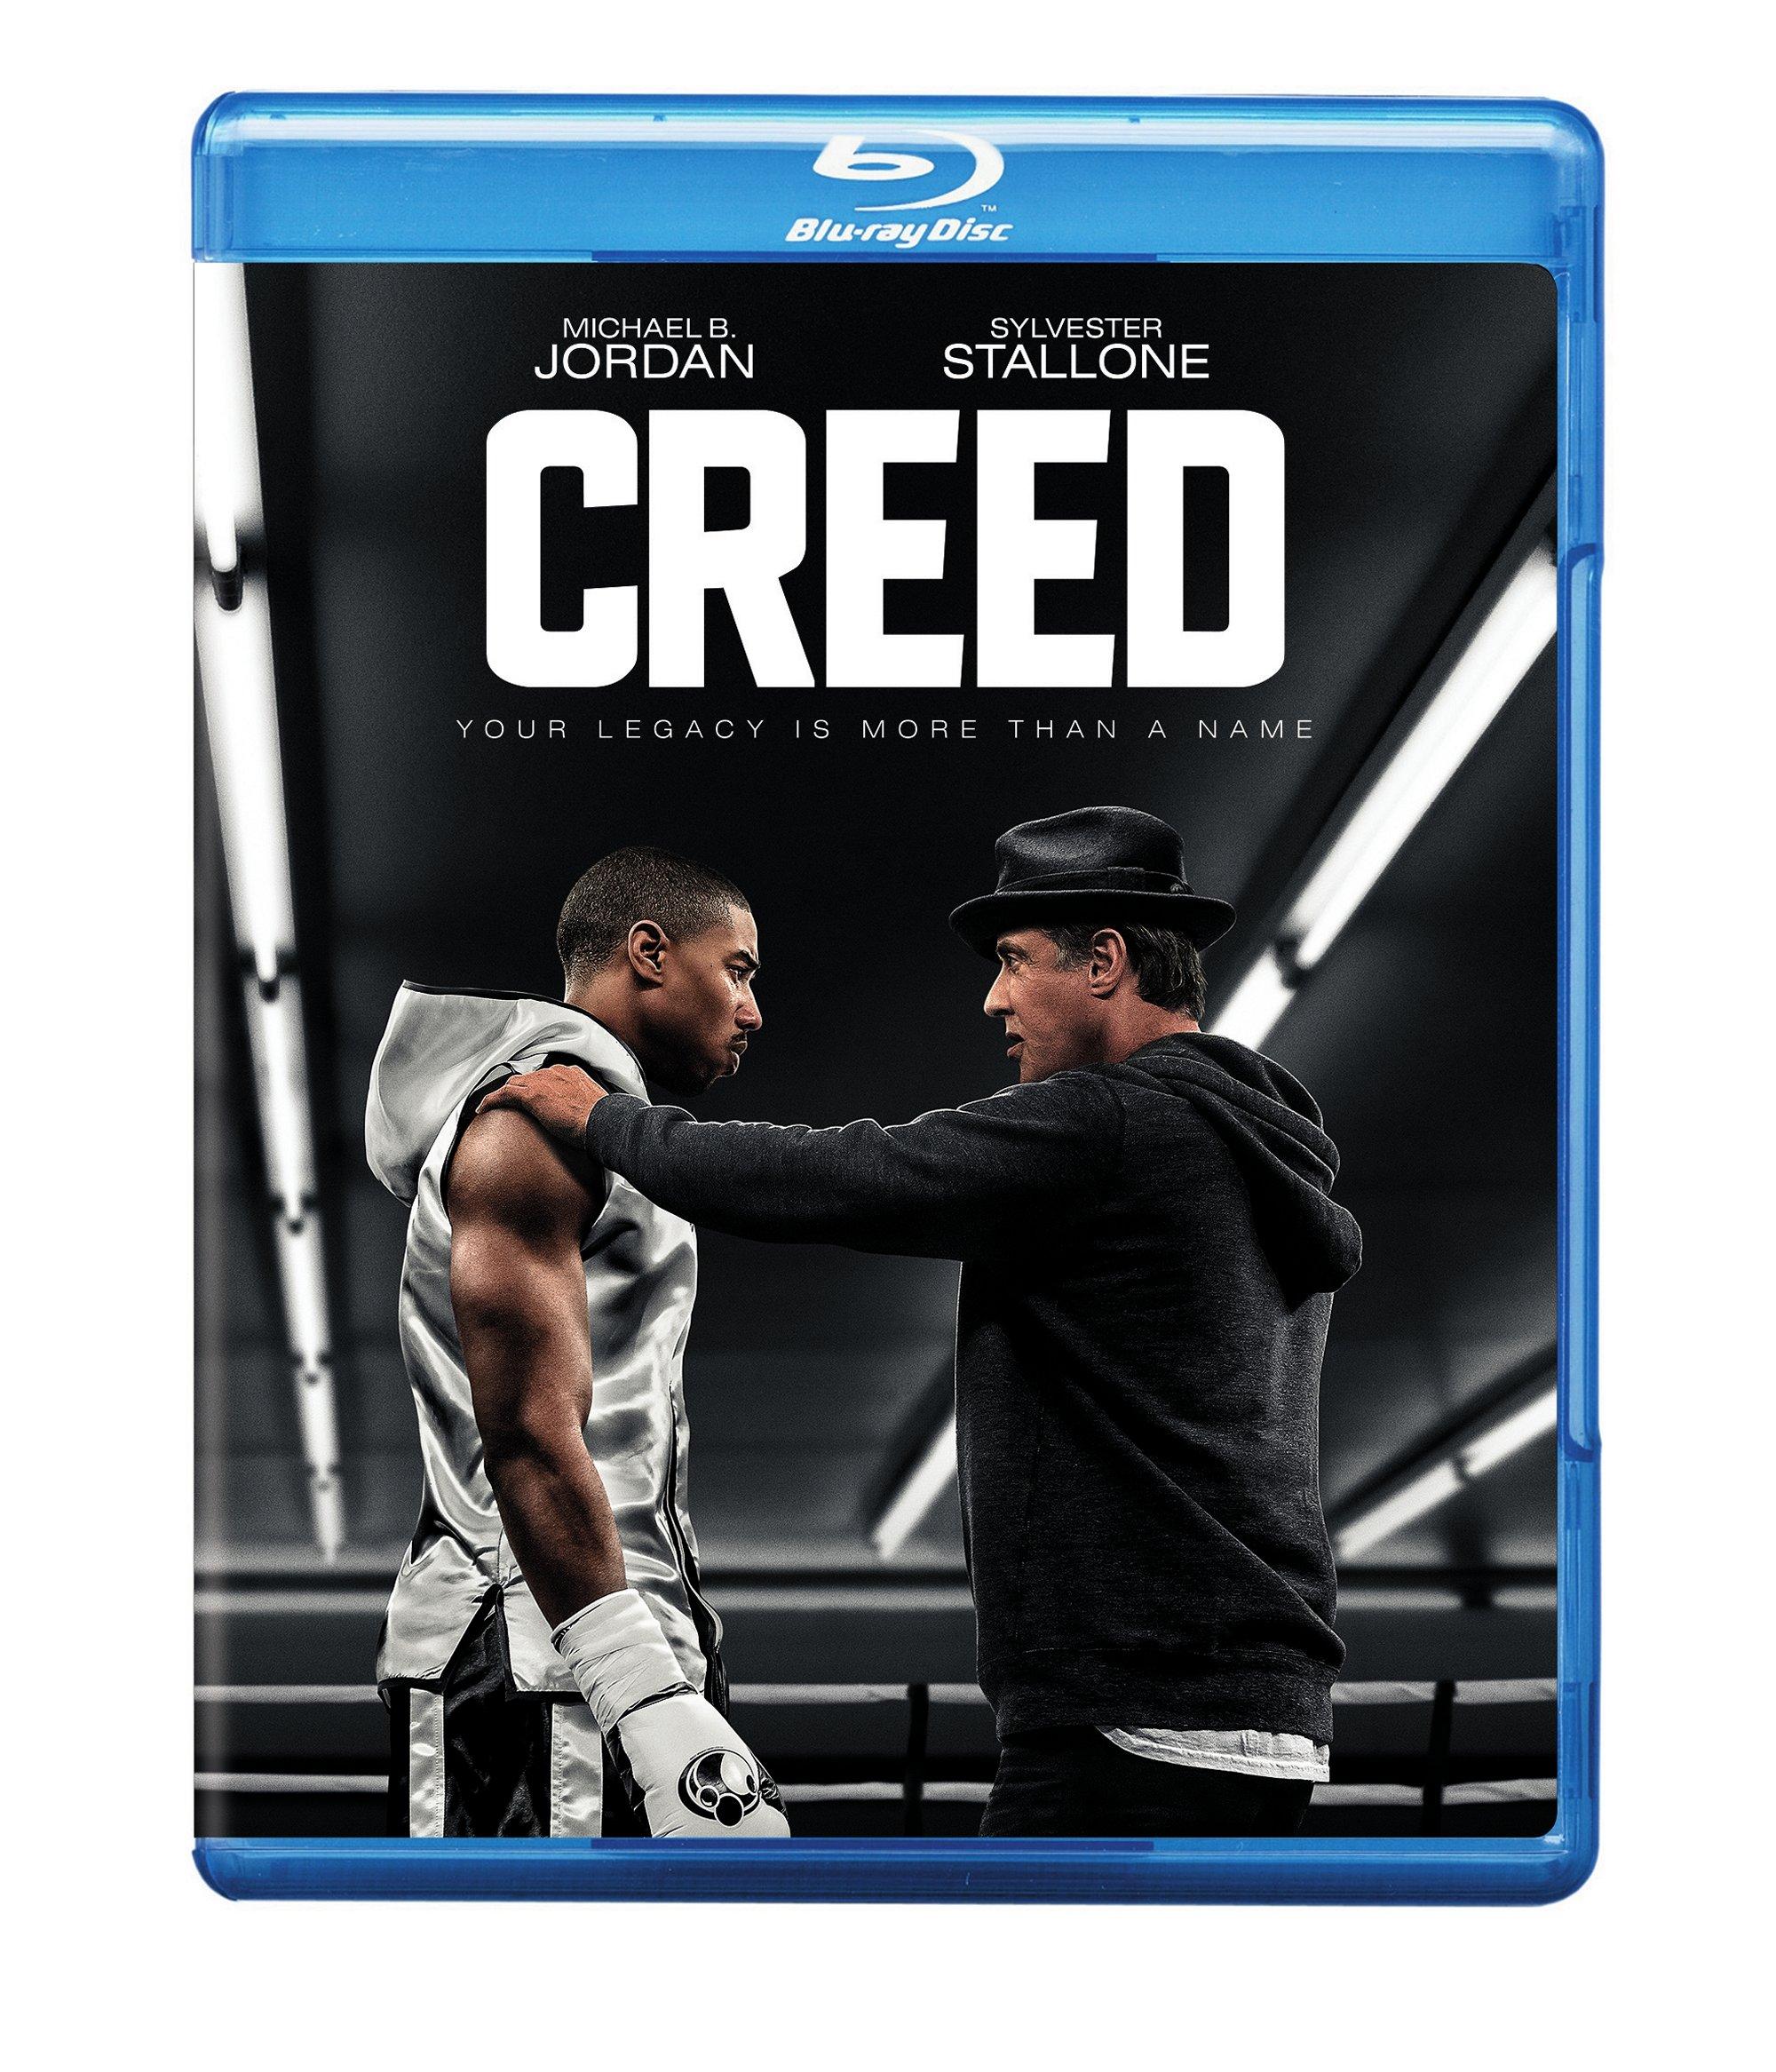 Creed by Michael B. Jordan in Blu-Ray (AC-3, Dolby, Eco Amaray Case) - Factory Sealed, Retail $10.00